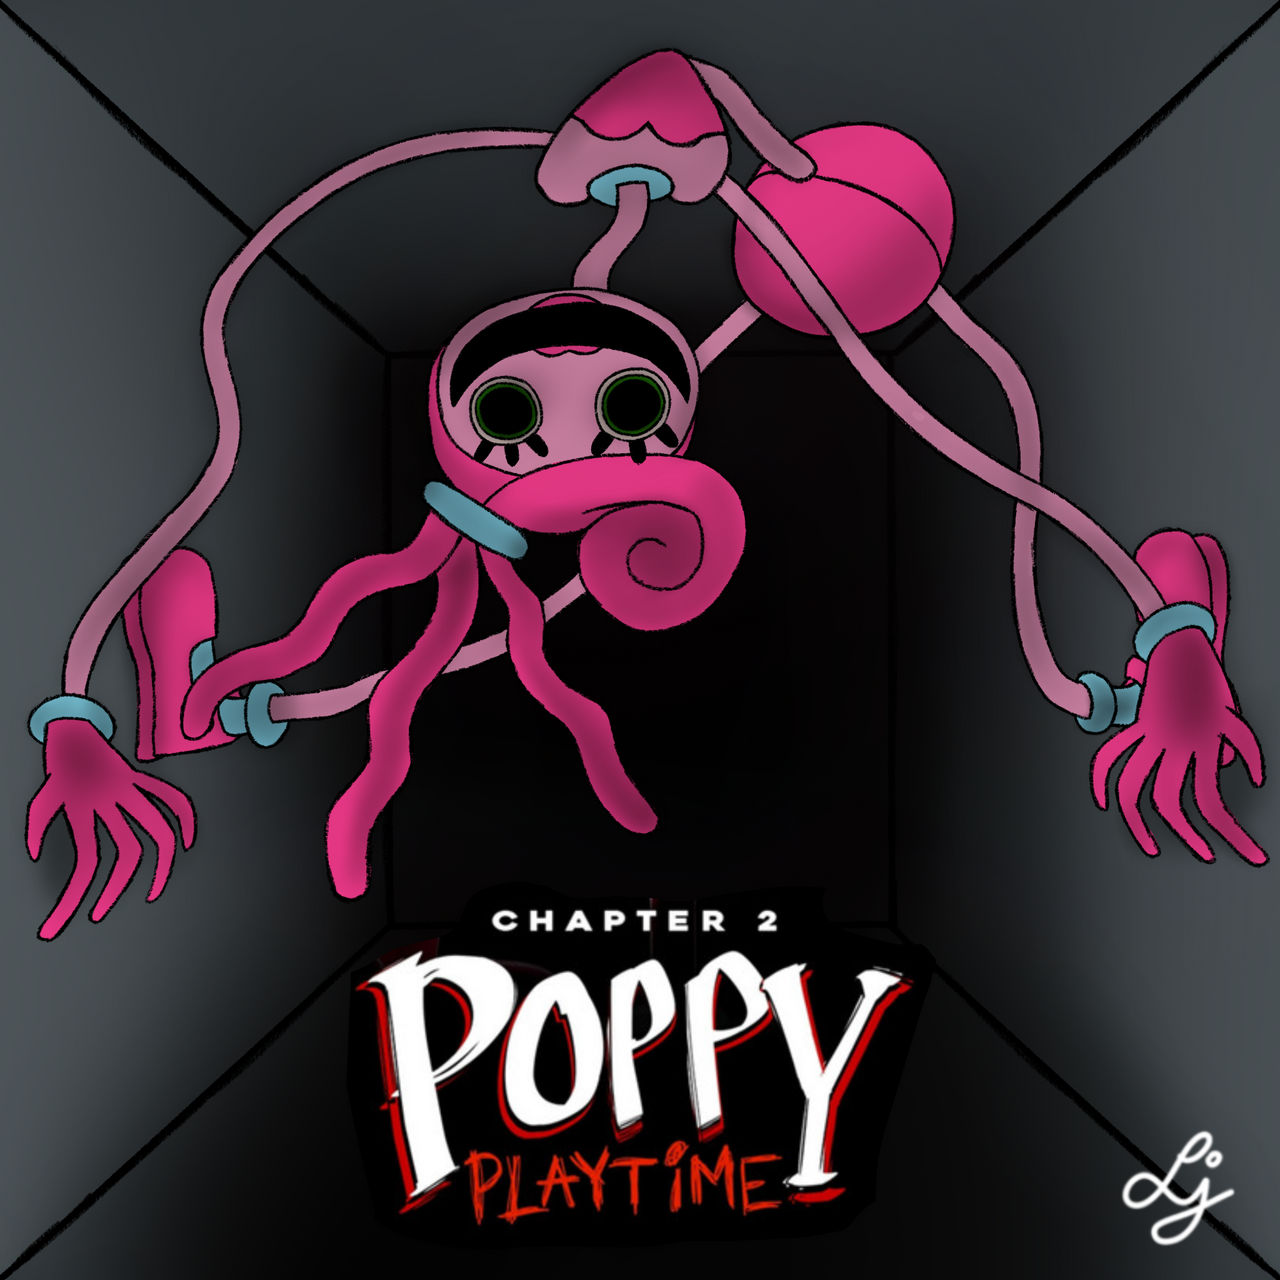 MOVED. on X: ⚠ WARNING: CONTAINS SPOILERS FROM POPPY PLAYTIME CHAPTER 2 ⚠ Mommy  Long Legs 🕷🕸💖 #PoppyPlaytime #PoppyPlaytimeChapter2 #PoppyPlaytimefanart  #MommyLongLegs #Drawing #Art #Fanart #Artwork  / X